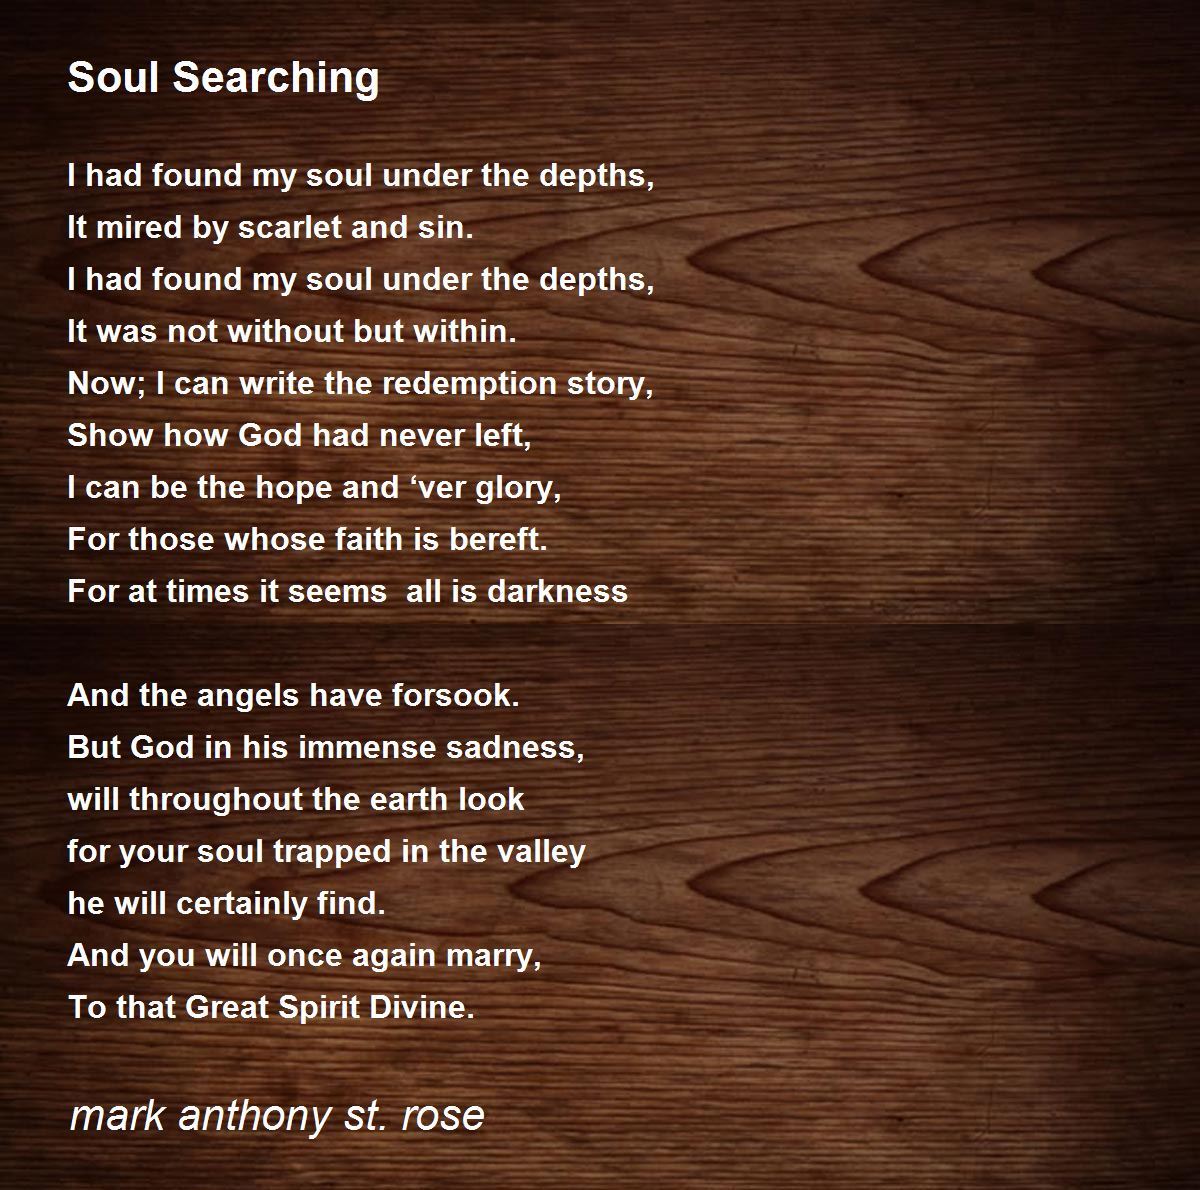 Soul Searching - Soul Searching Poem by mark anthony st. rose